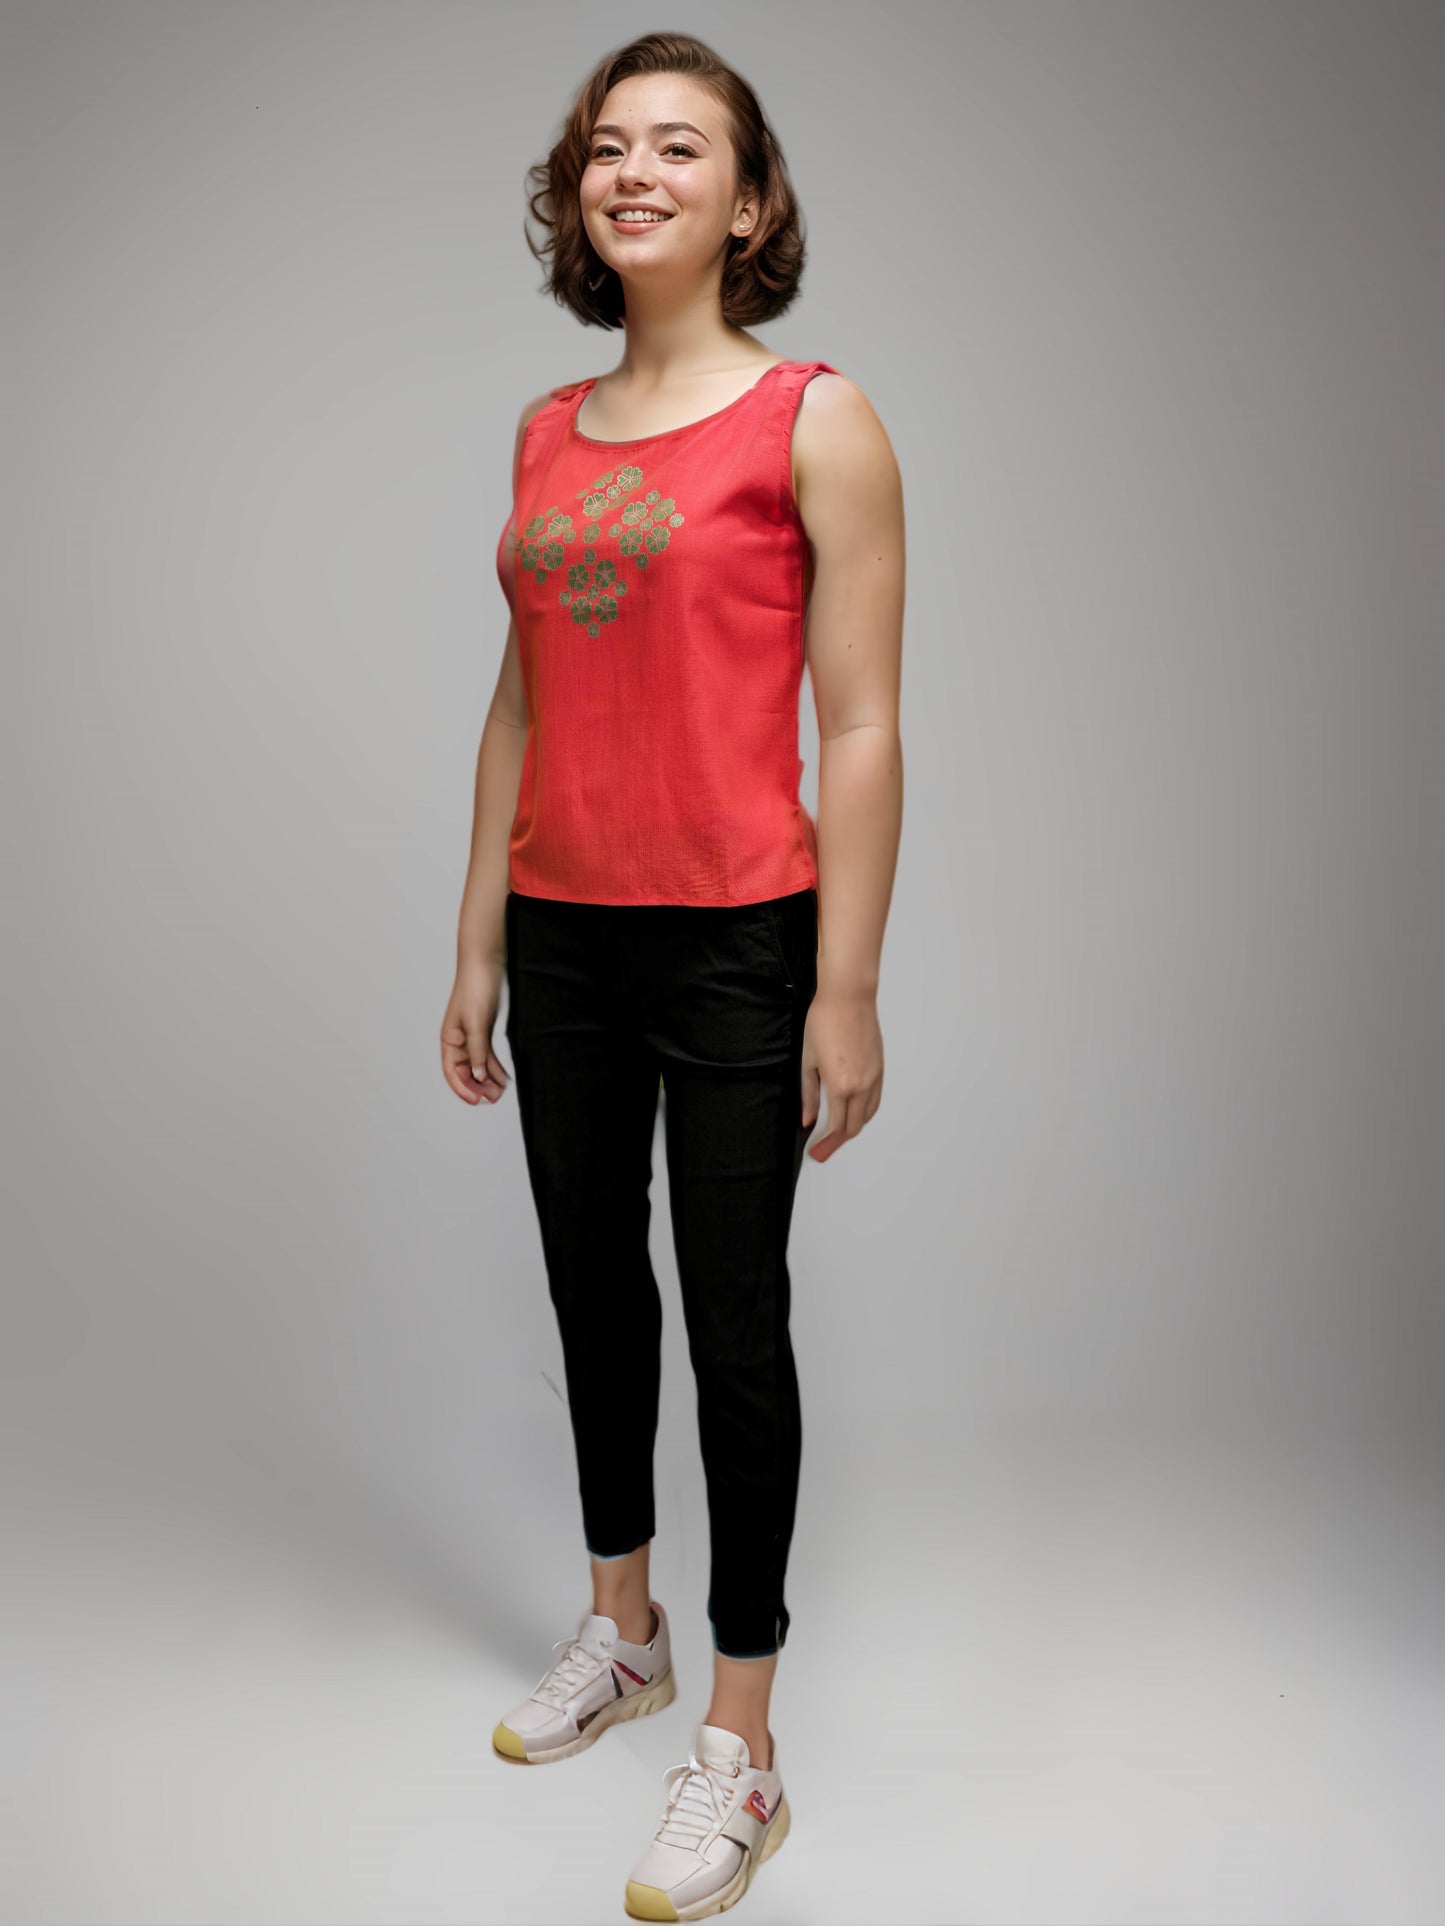 Aabandh's Sleevless Top - Flora ( Ruby Cotton )